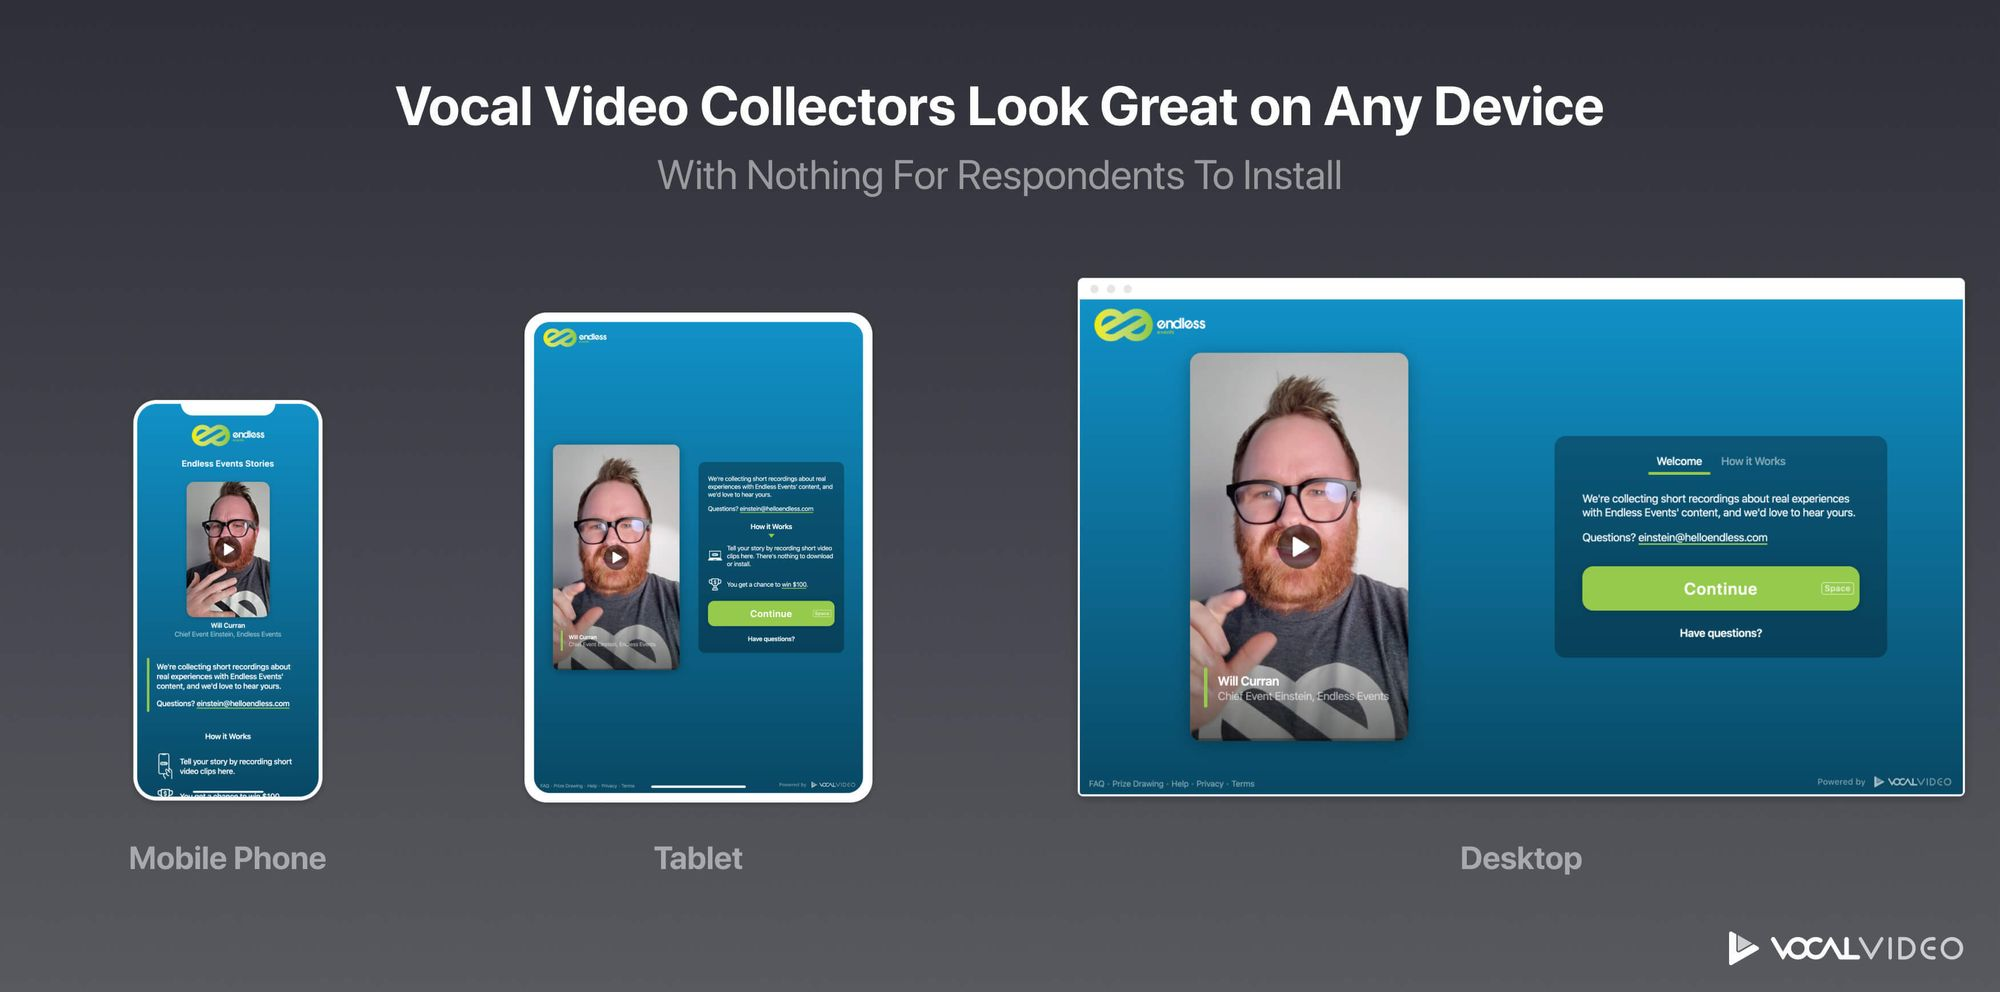 Vocal Video Collectors Look Great on Any Device: Mobile Phone, Tablet, Desktop